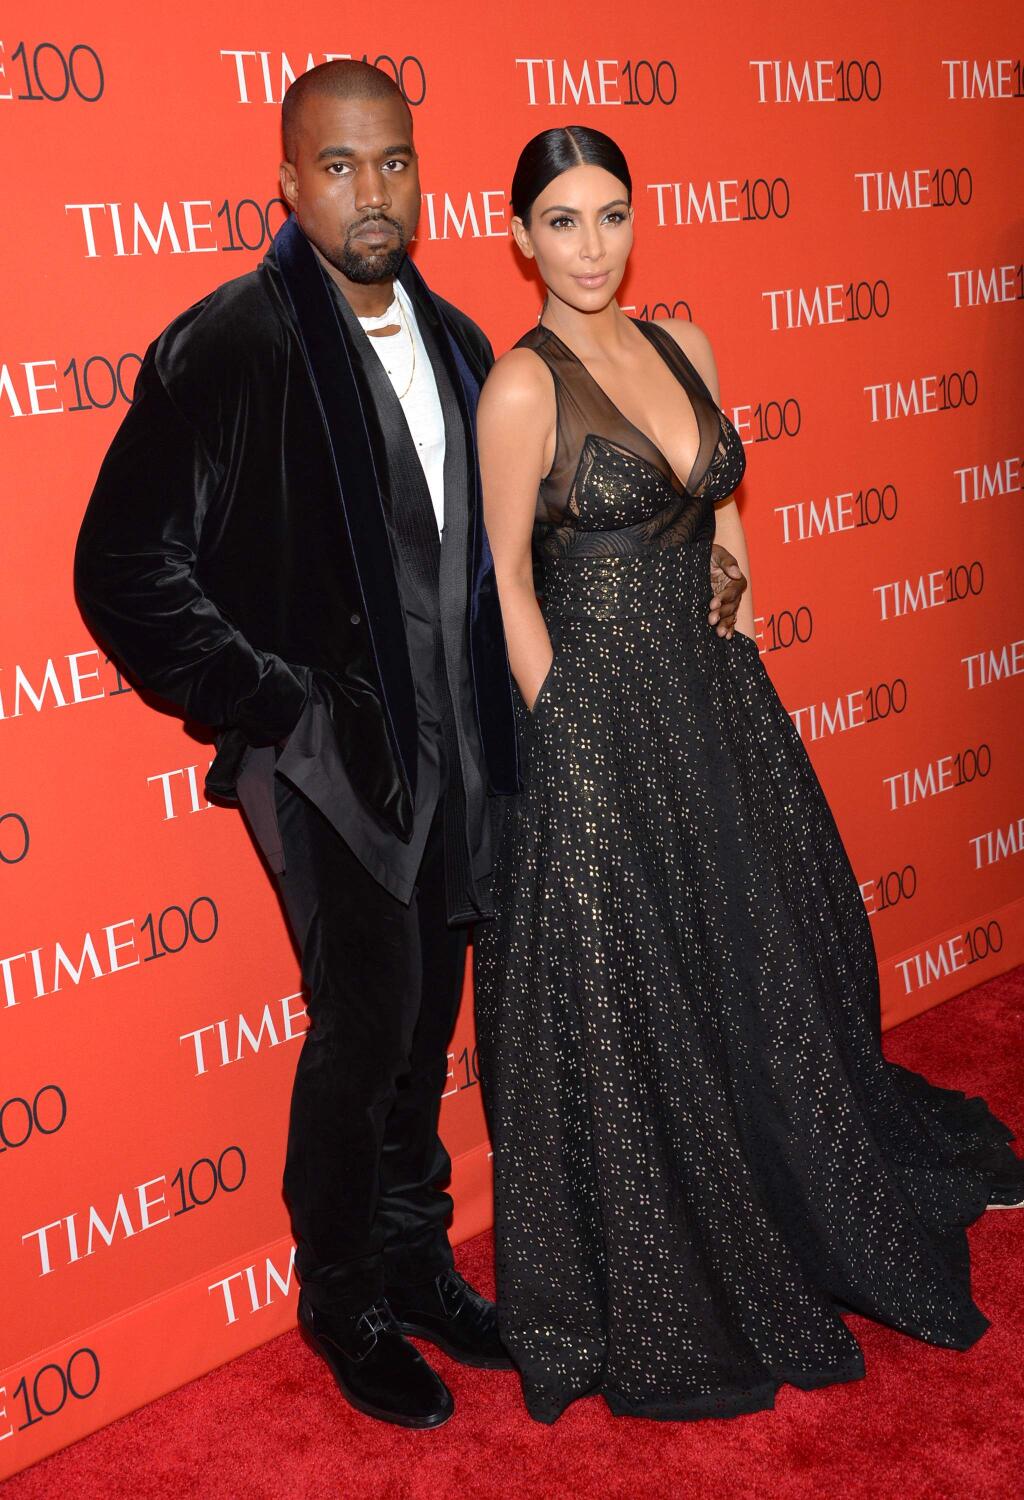 Kanye West, left, and Kim Kardashian attend the TIME 100 Gala, celebrating the 100 most influential people in the world, at the Frederick P. Rose Hall, Time Warner Center on Tuesday, April 21, 2015, in New York. (Photo by Evan Agostini/Invision/AP